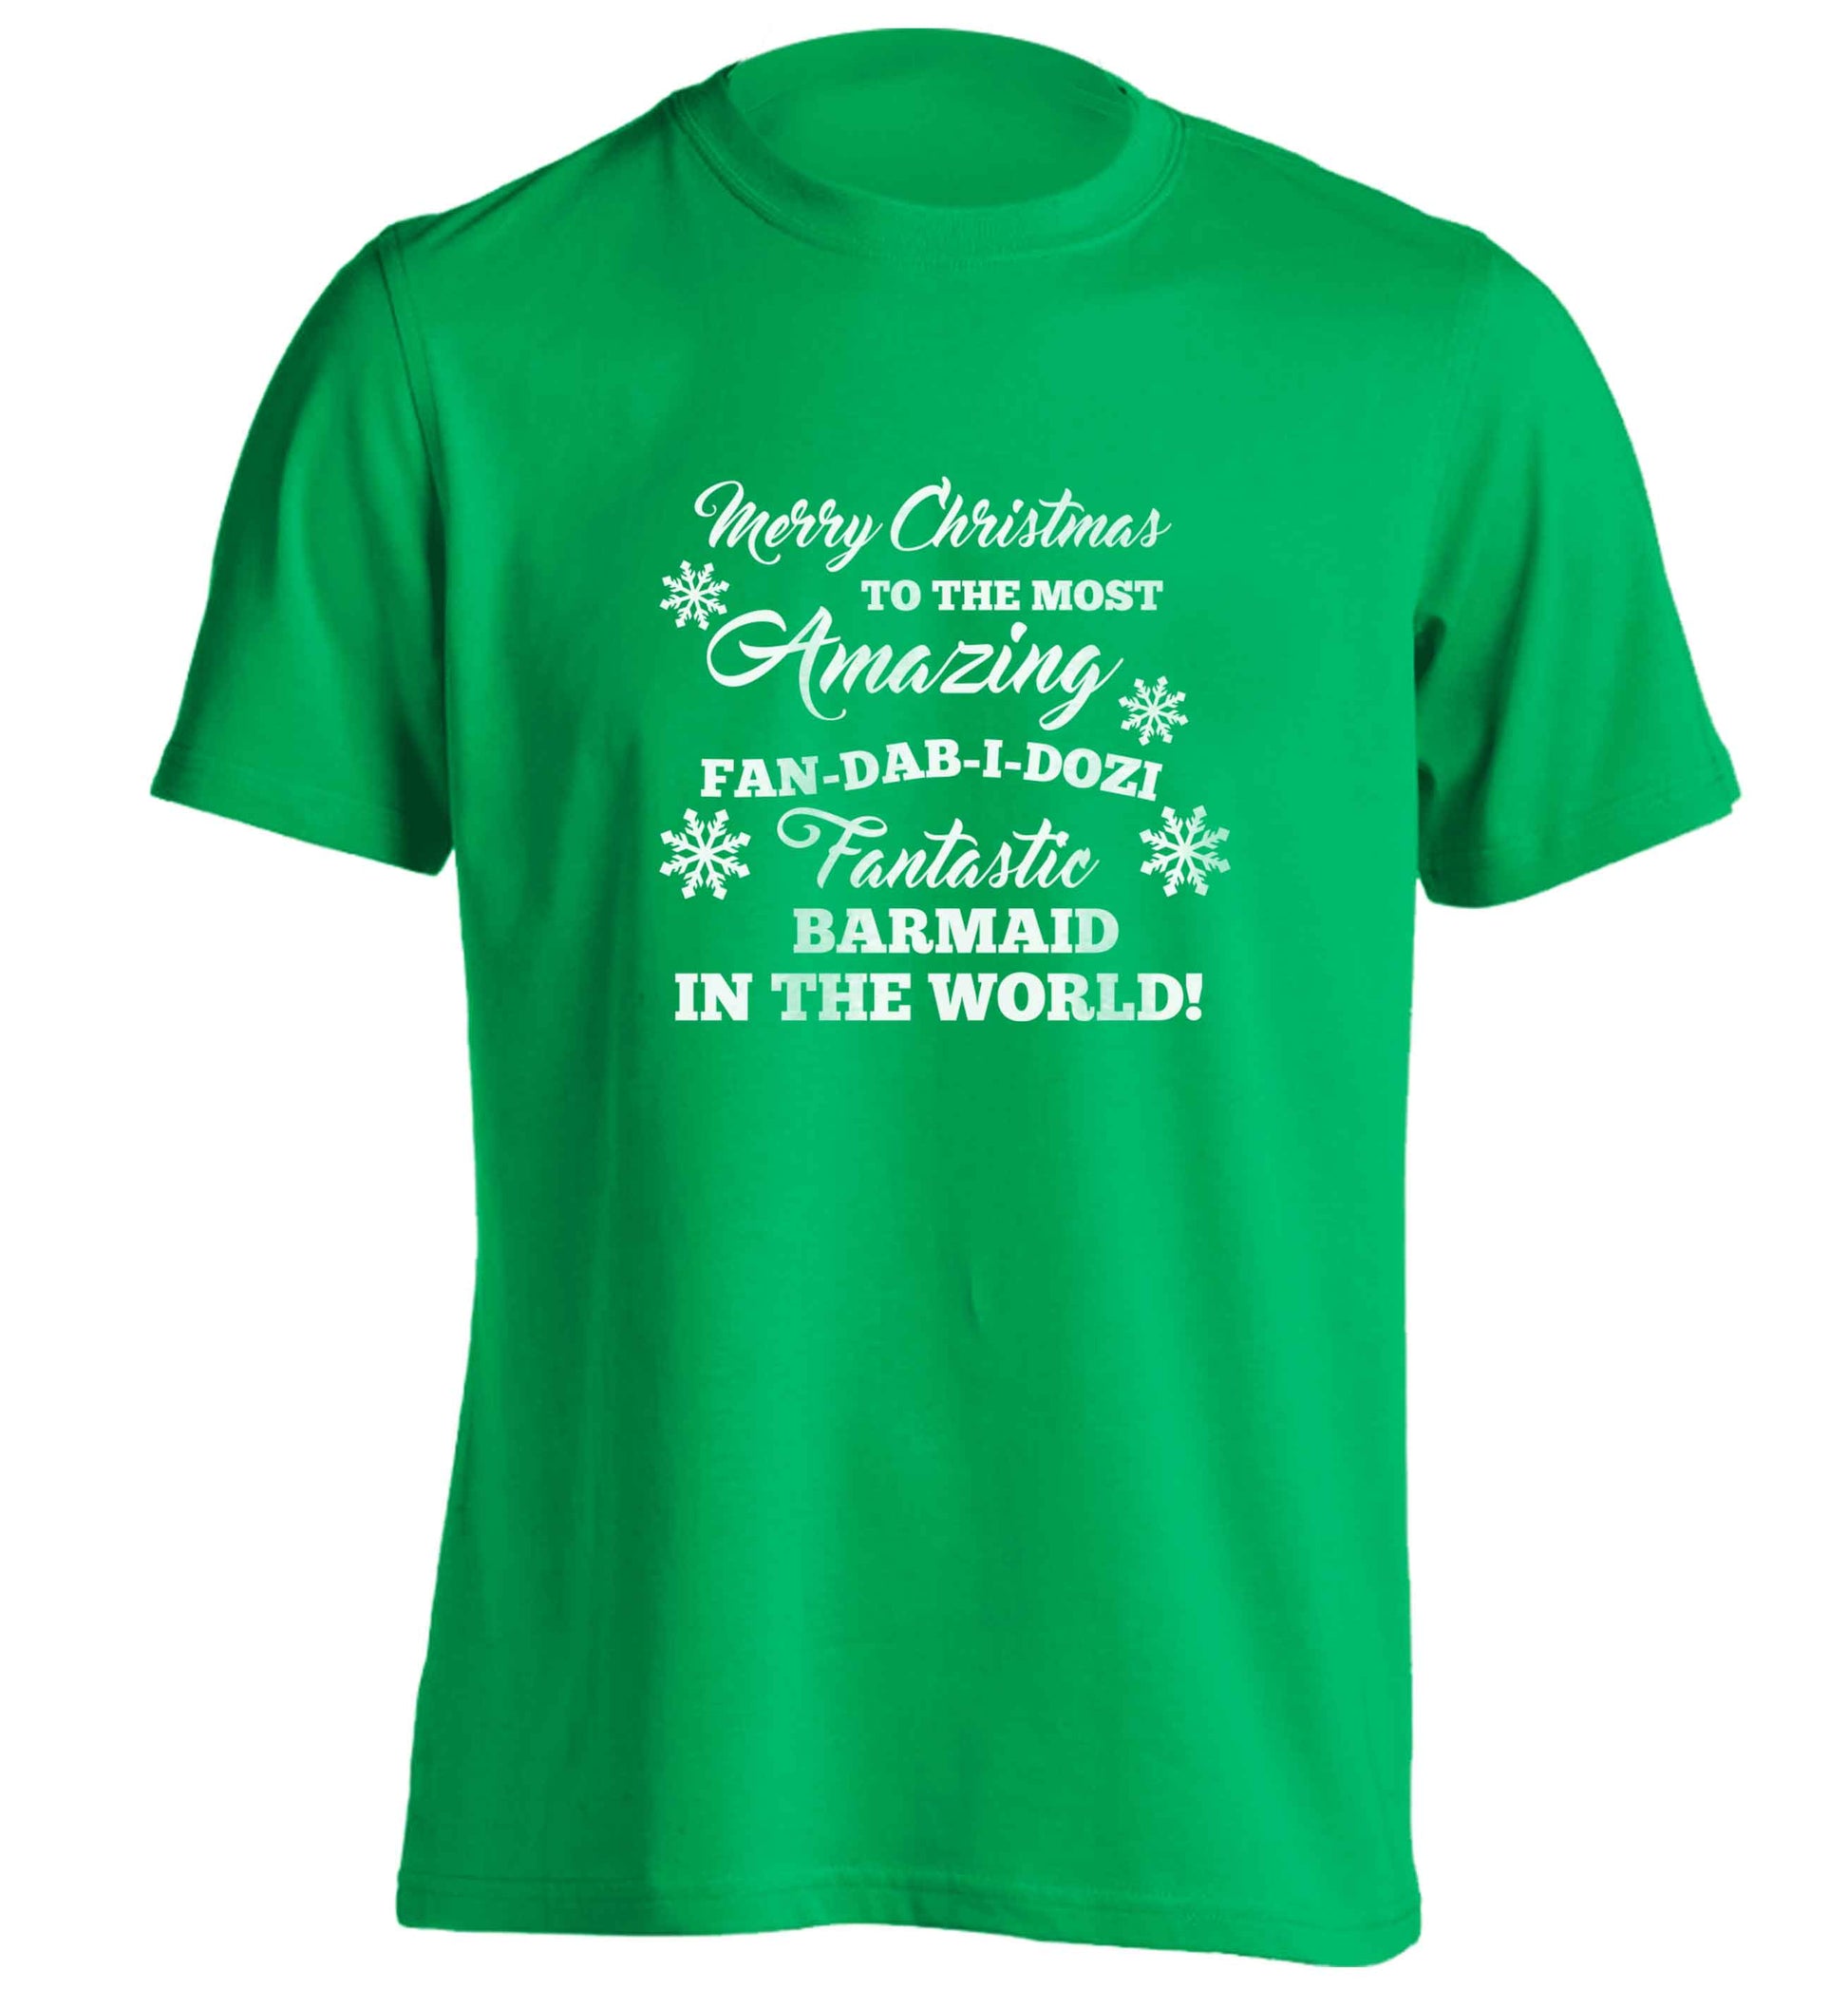 Merry Christmas to the most amazing barmaid in the world! adults unisex green Tshirt 2XL